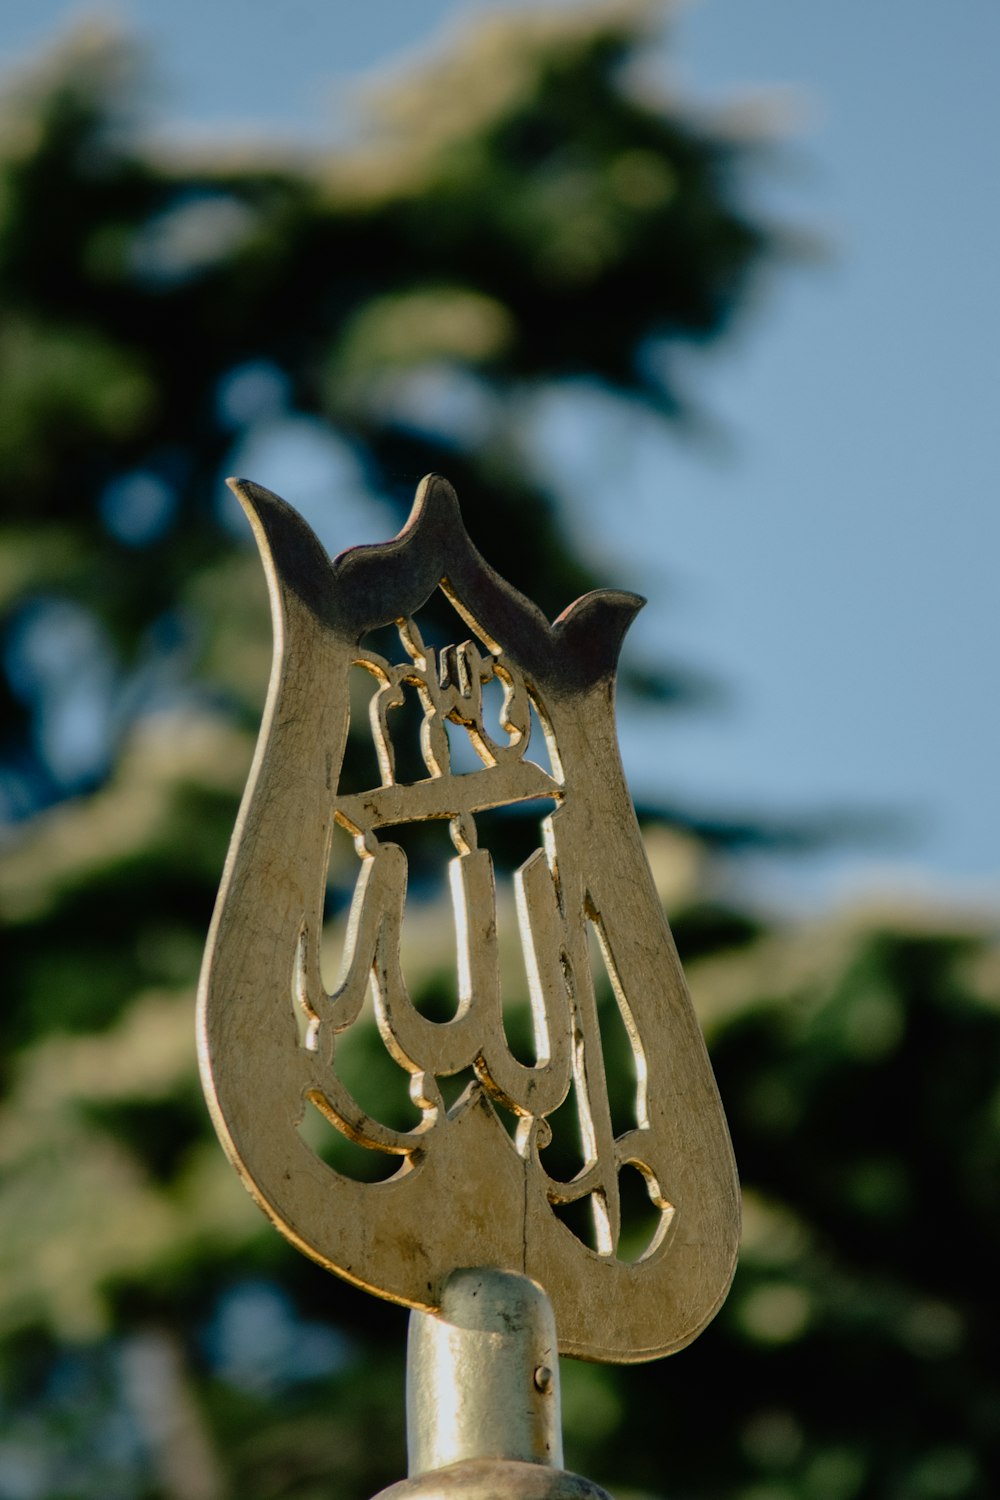 a close up of a metal object with a tree in the background